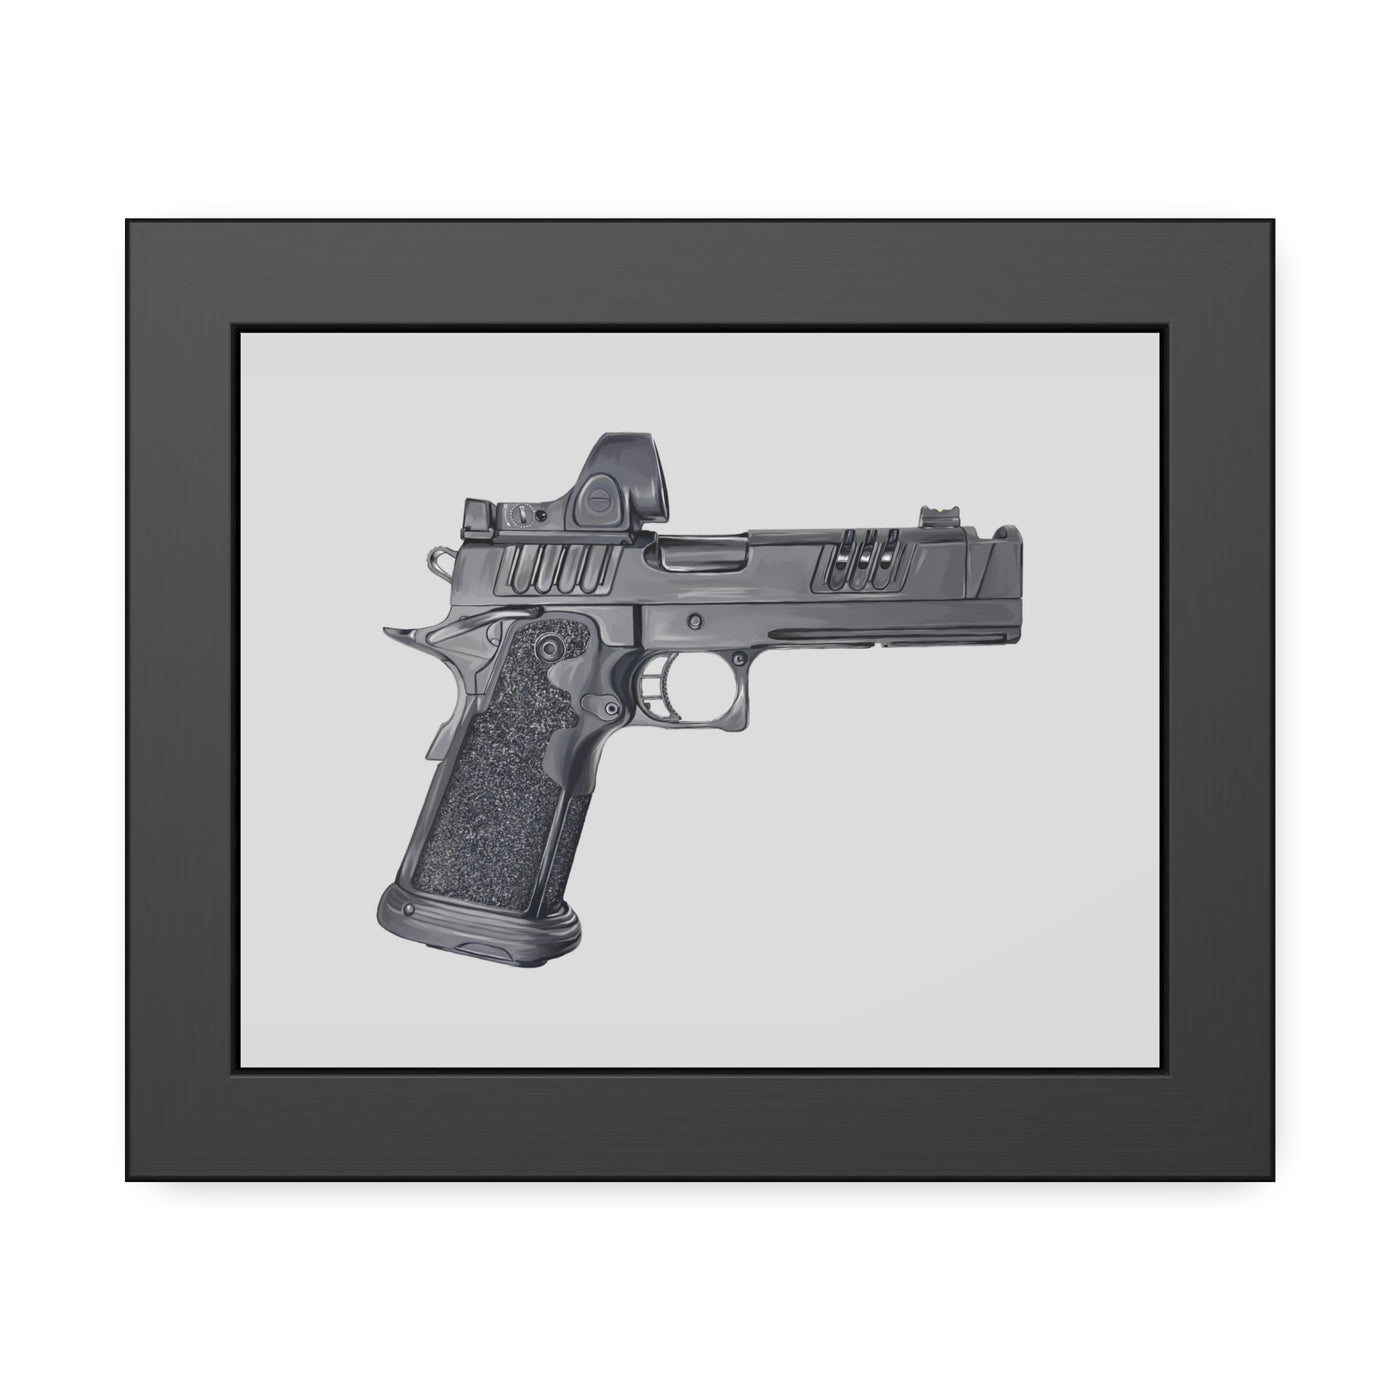 2011 Delta Pistol Painting - Just The Piece - Black Frame - Value Collection